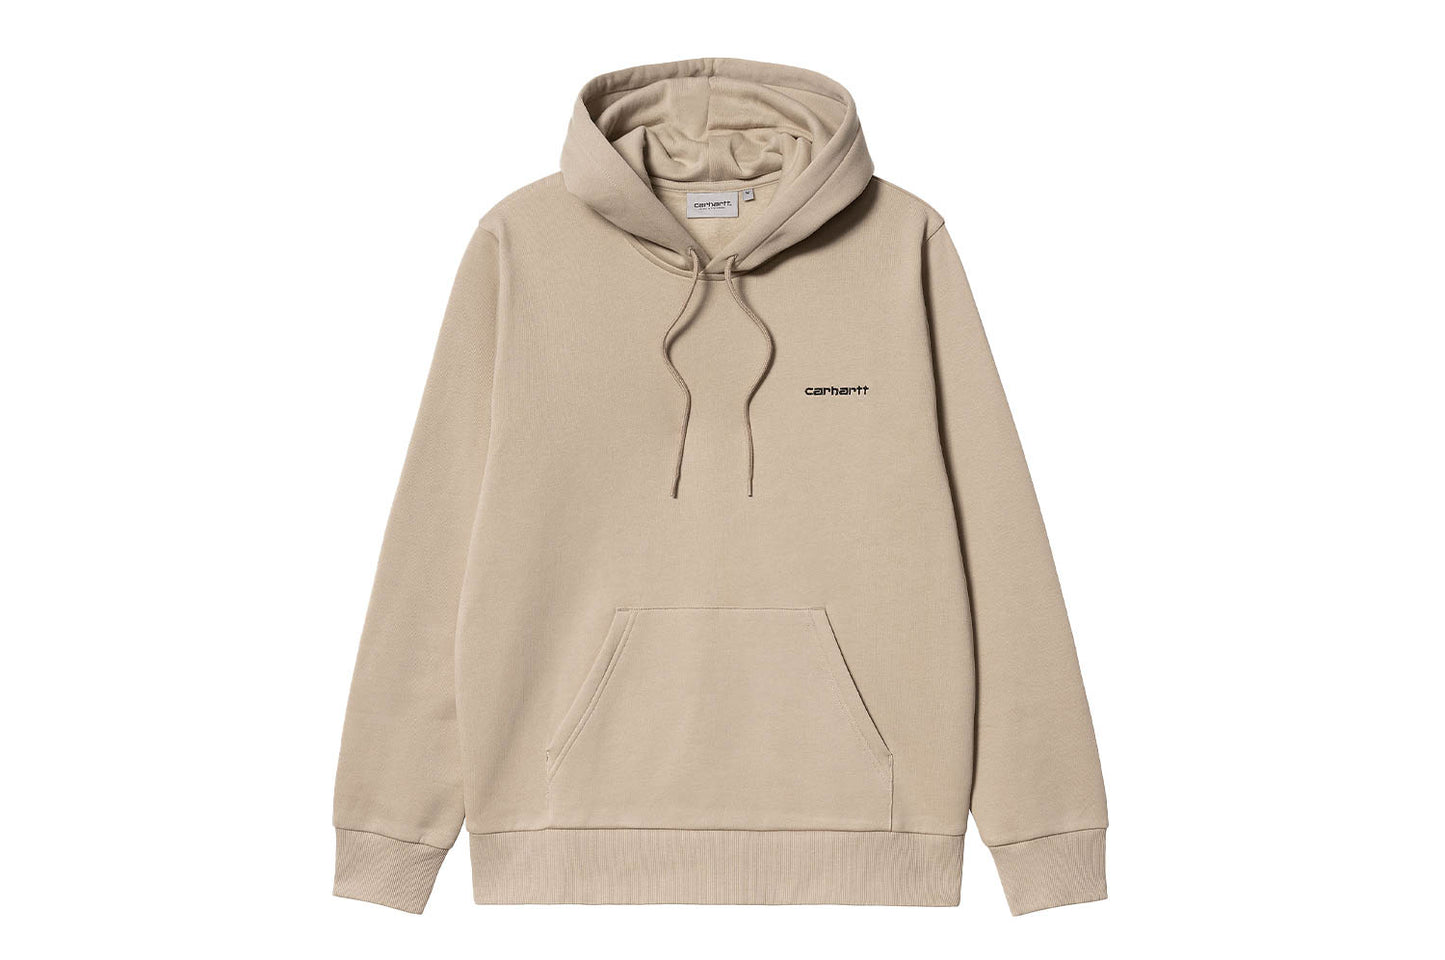 Hooded Script Embroidery Sweat